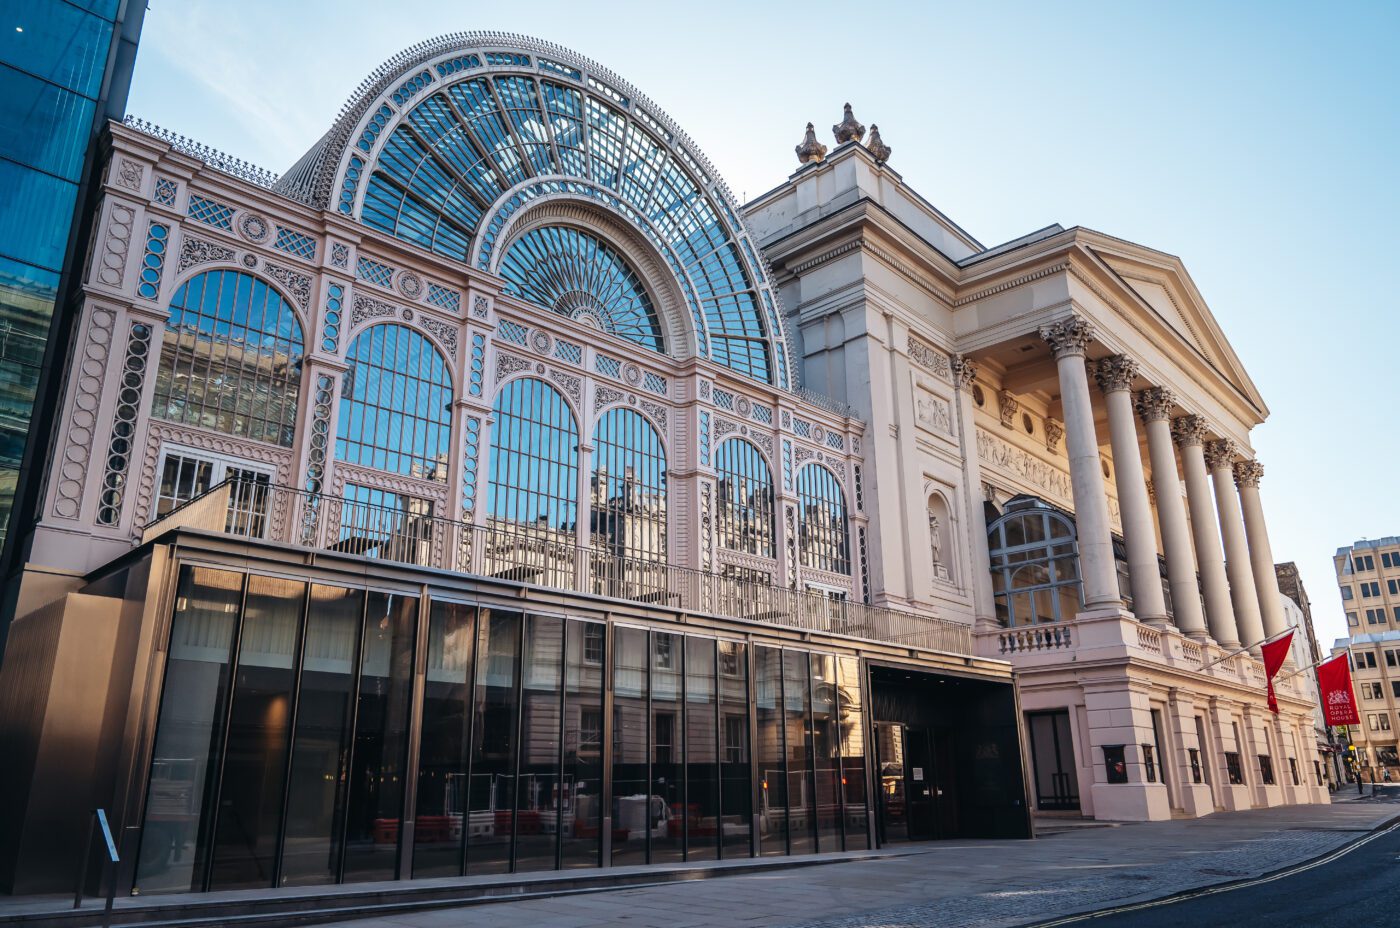 The Royal Opera House in Covent Garden, London